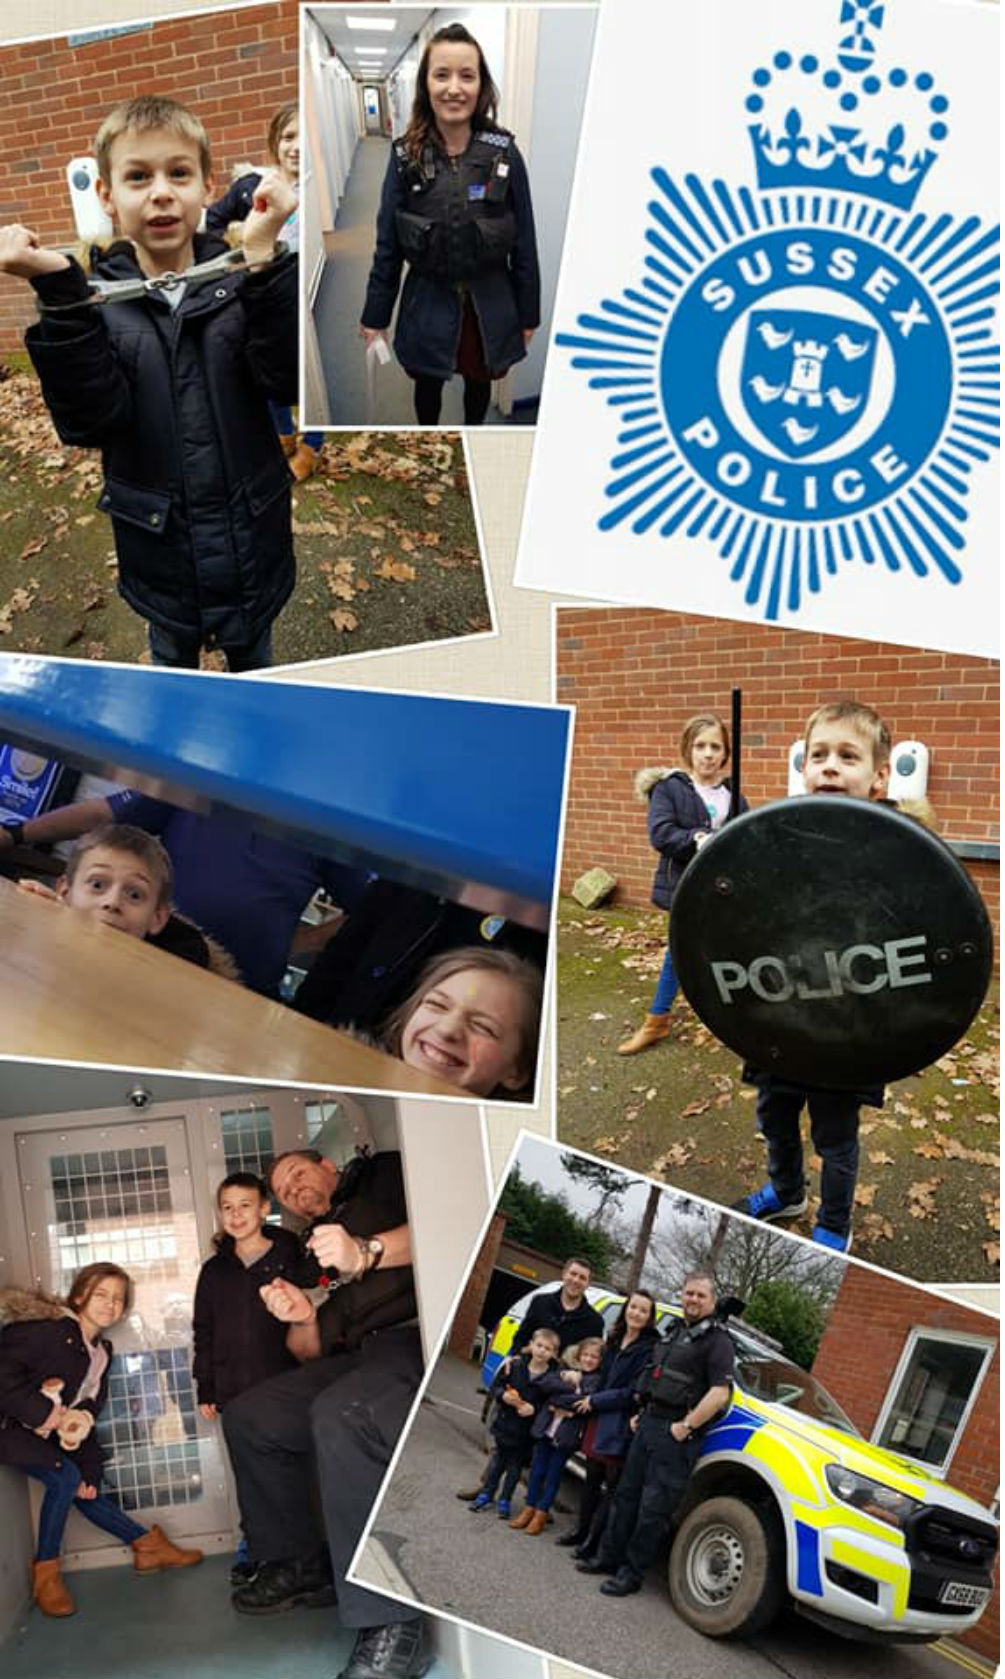 A collage of the day James Glass spent at Horsham police station